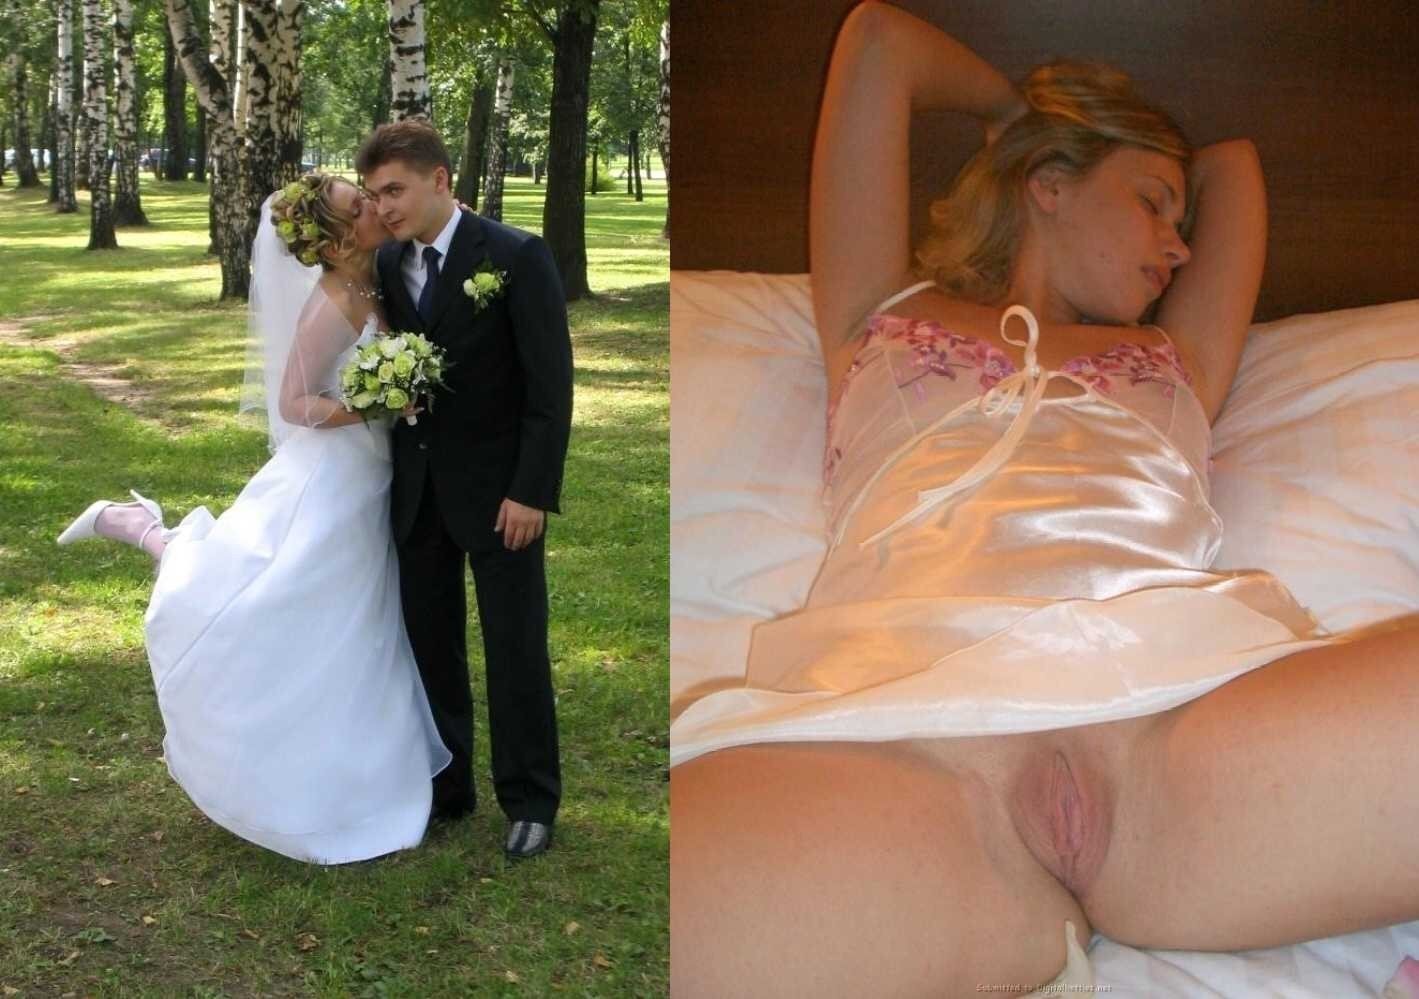 Naked Bride and Gromo image